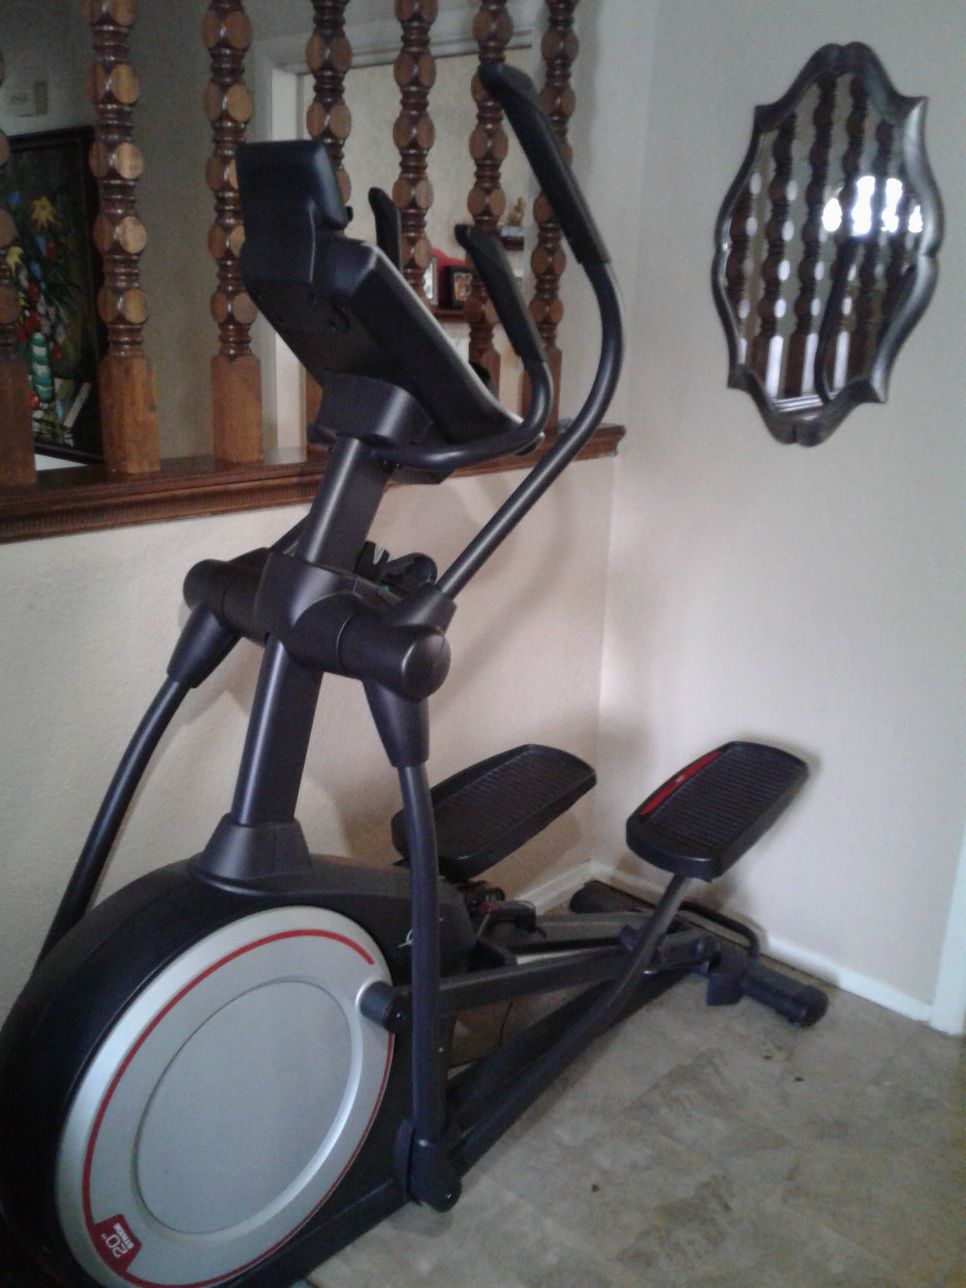 Trading a Nordictrack elliptical for a treadmill